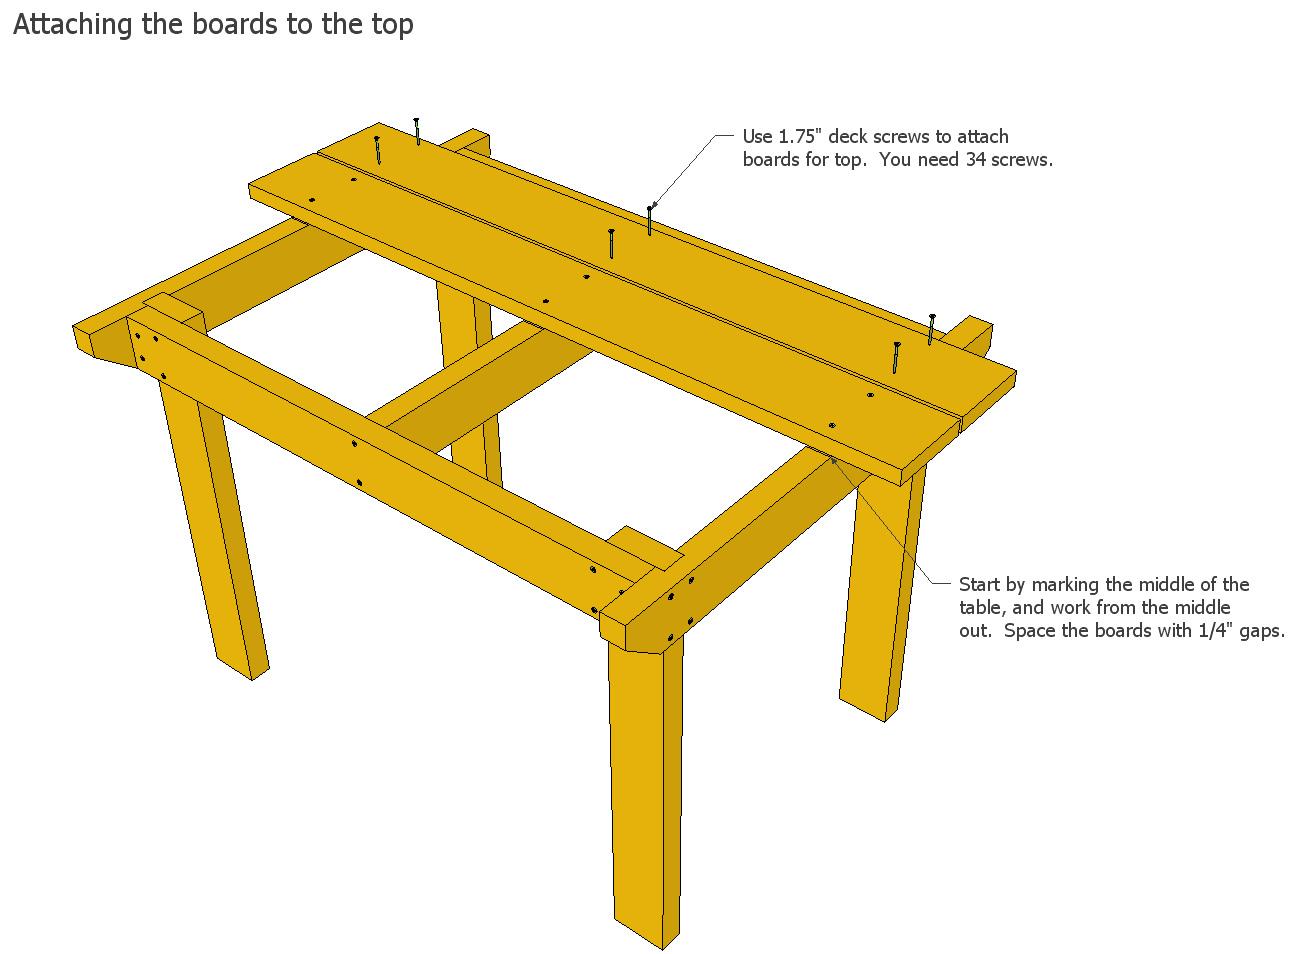 also have the plans in SketchUp of this table that you can download 